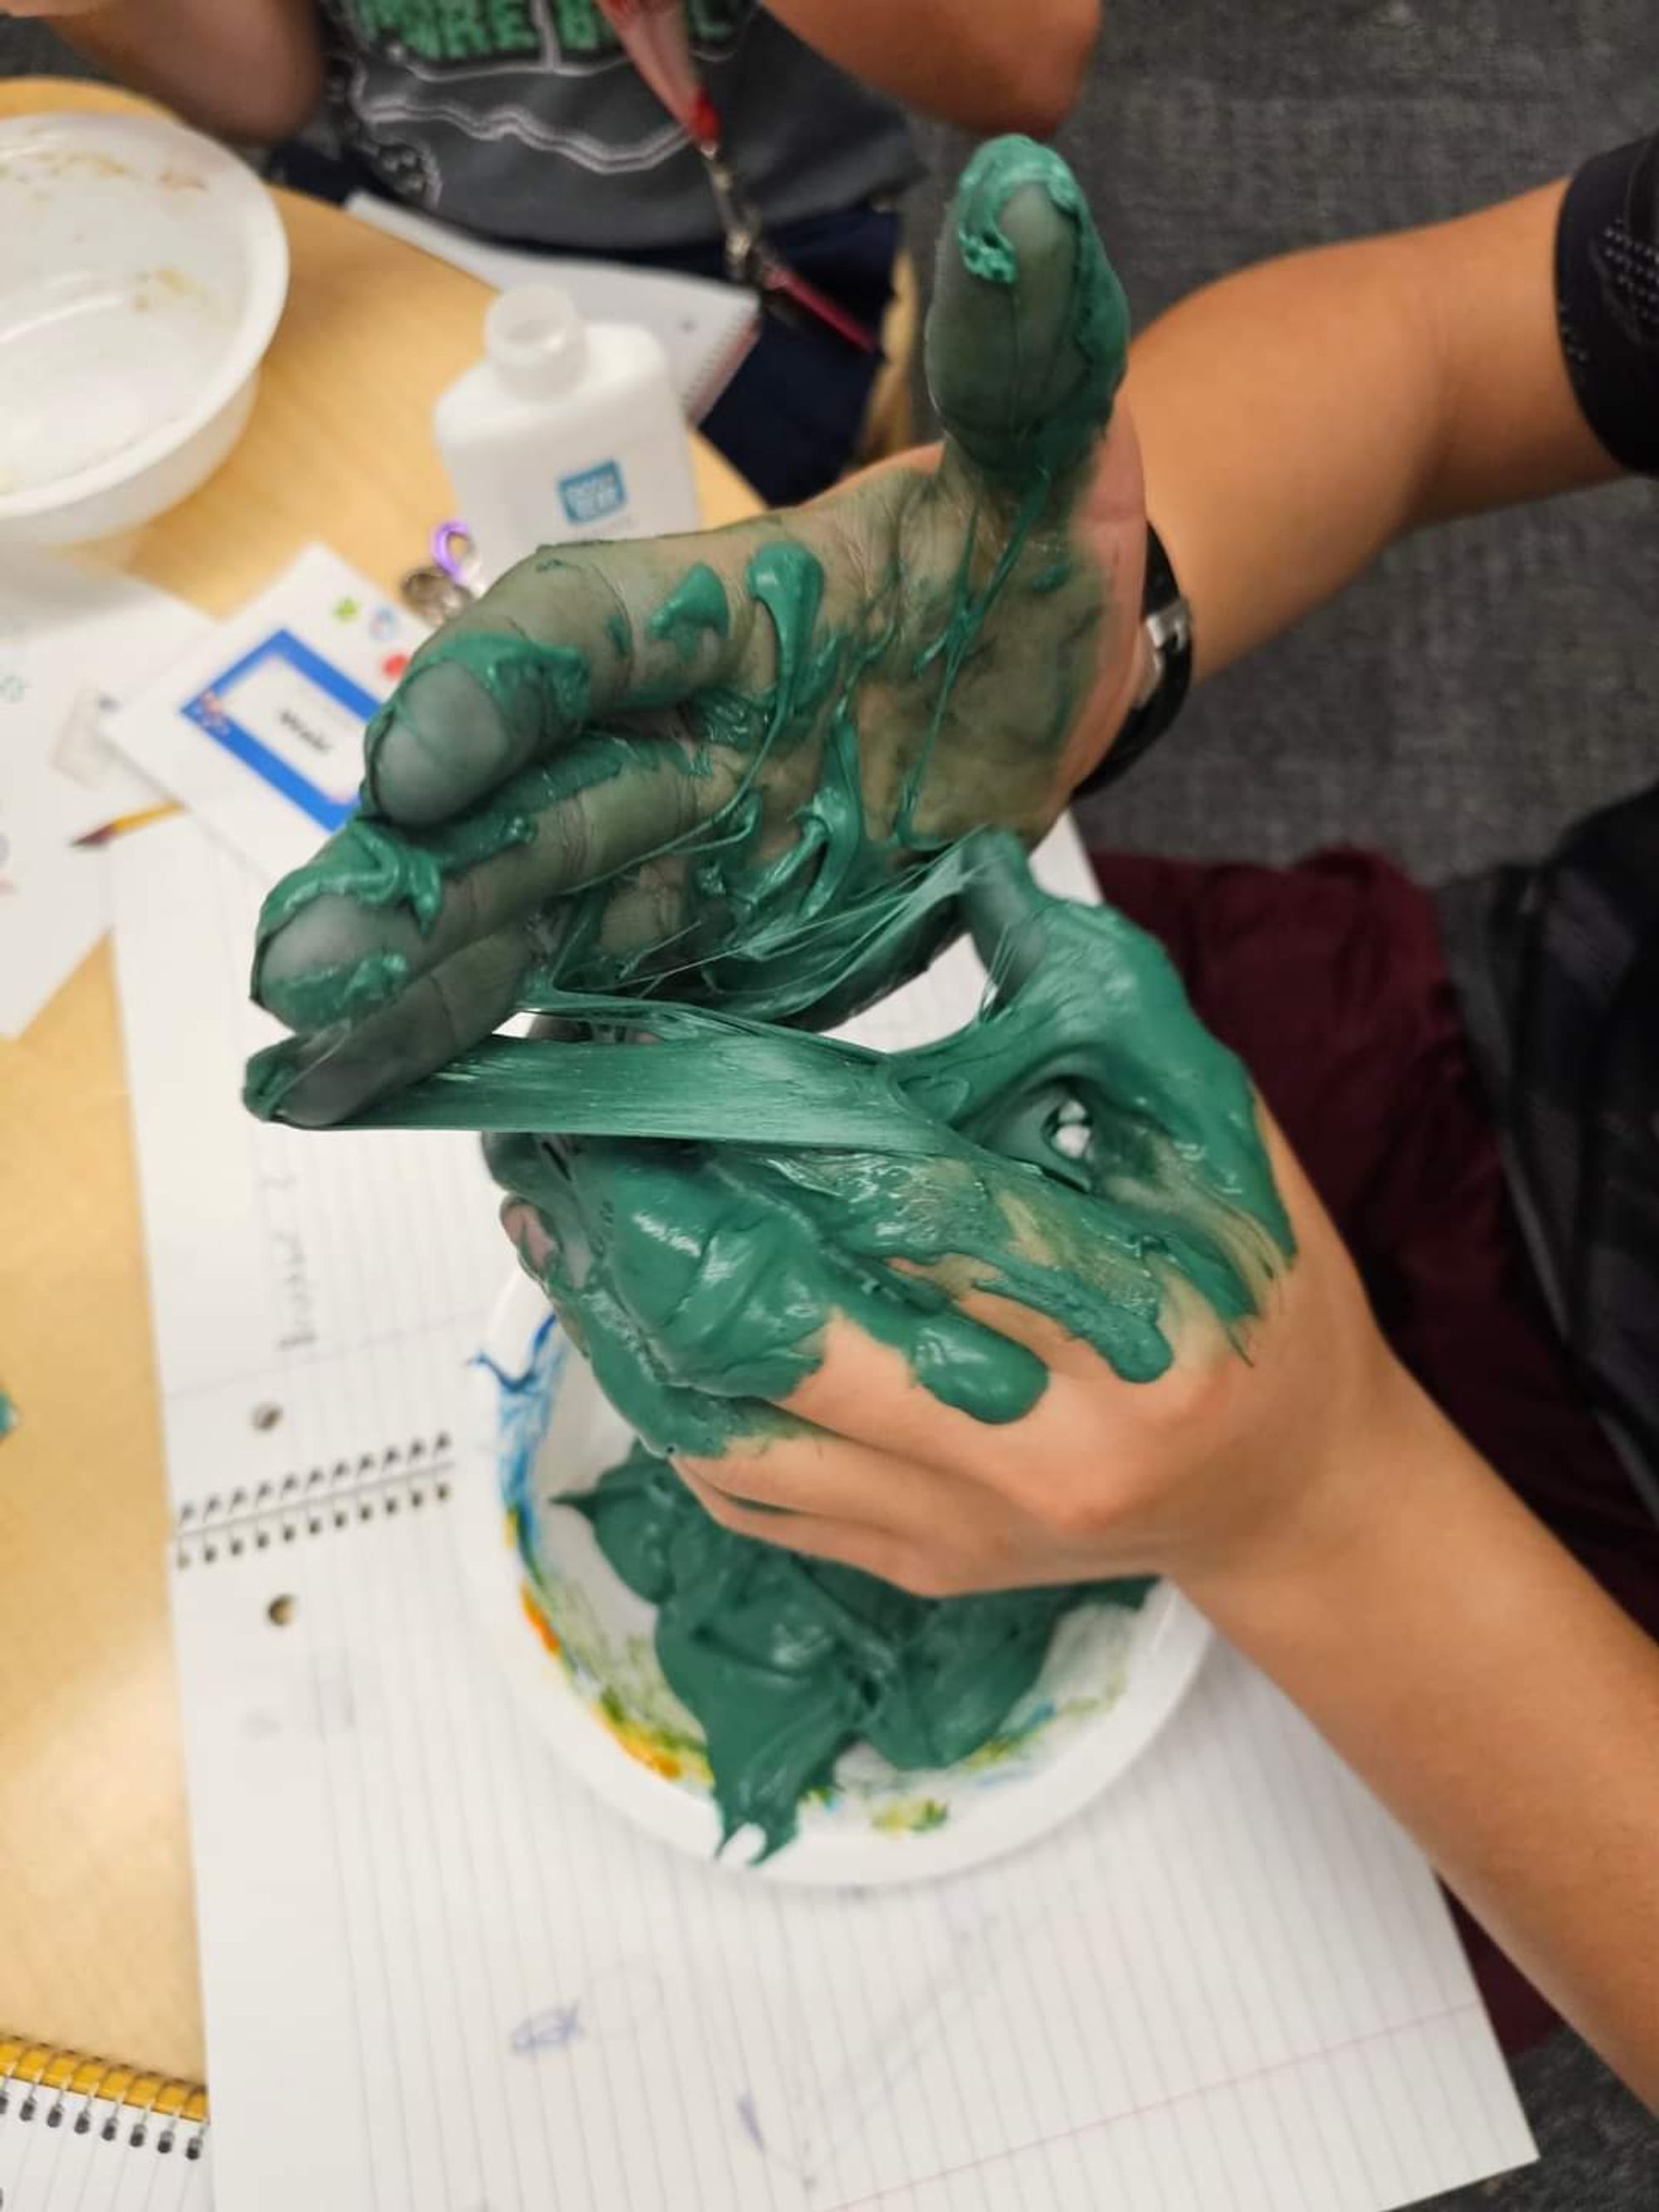 Our “mad scientists” had to really get their hands dirty! (Or “slimy,” in this case…)